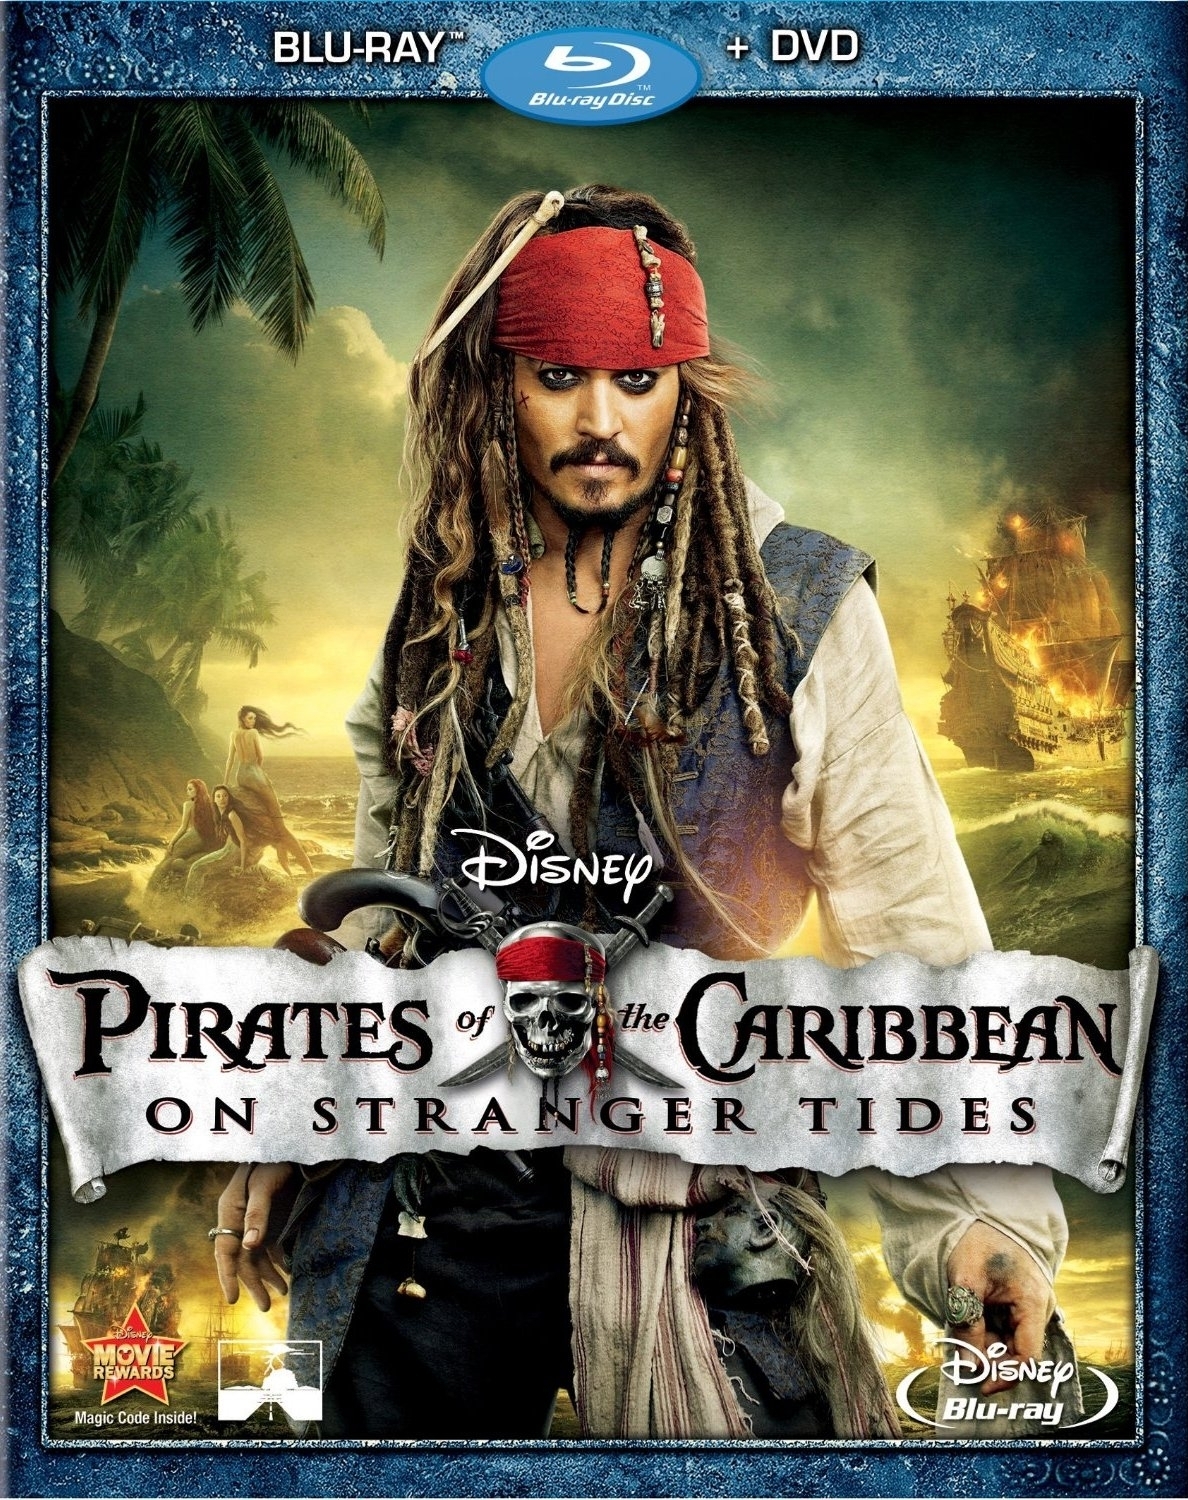 watch pirates of the caribbean on stranger tides darewatch